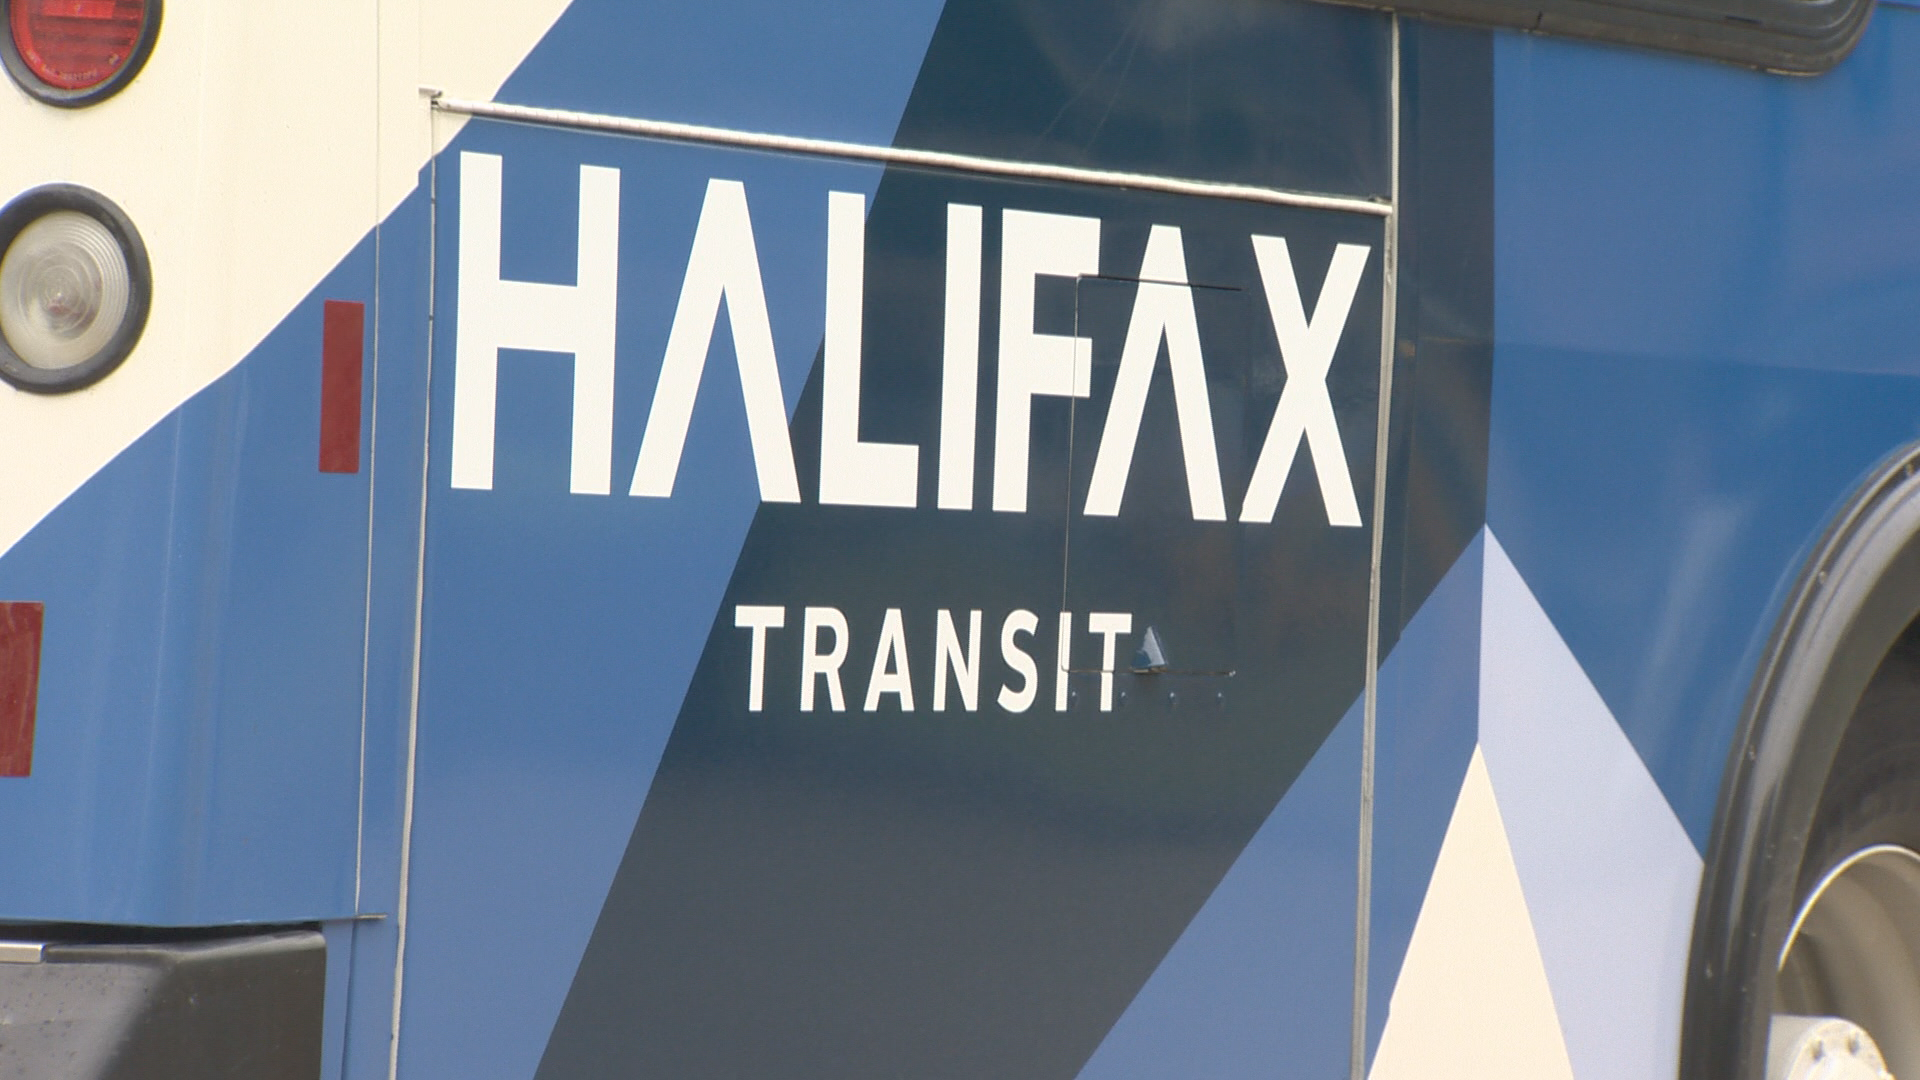 Halifax bus driver goes into ditch, charged with impaired driving: police